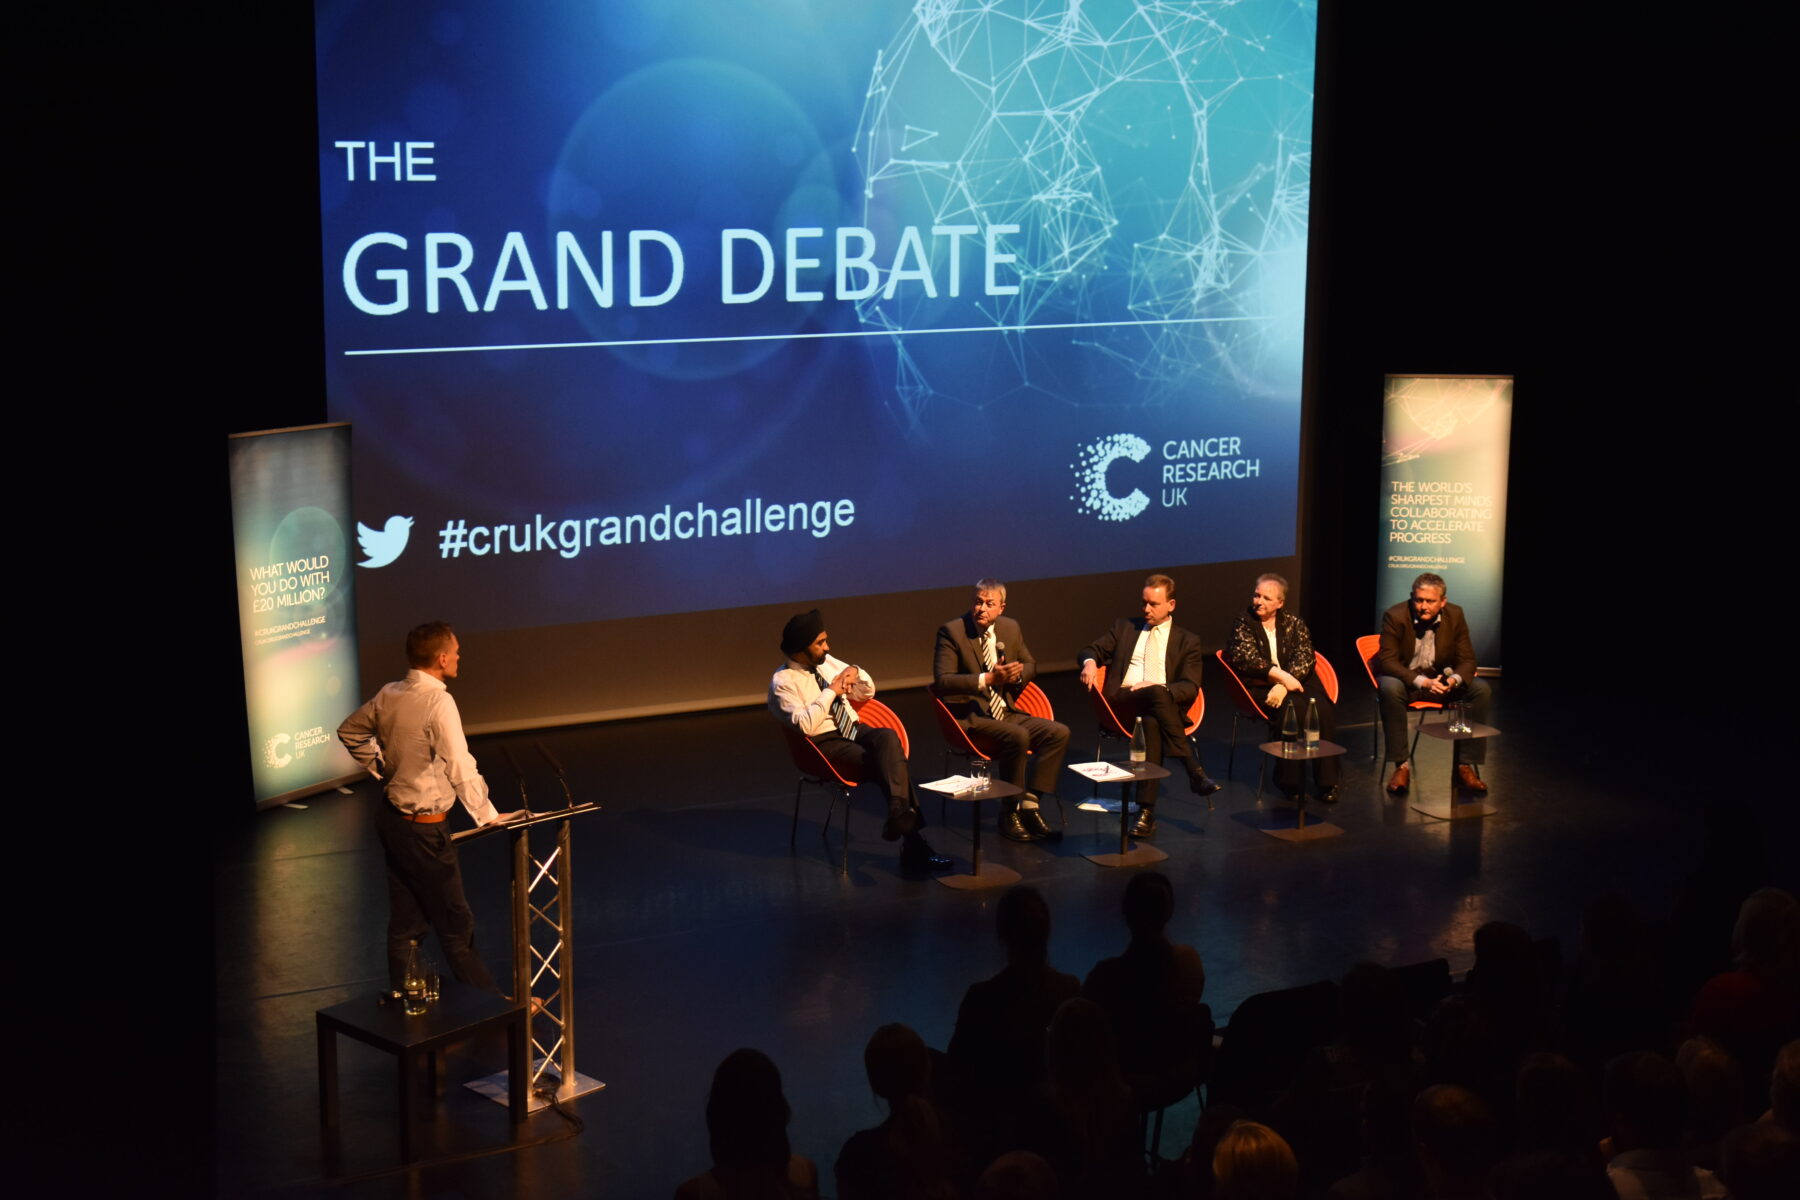 Iain Foulkes chairs a Grand Debate session during The Big Think in 2015.